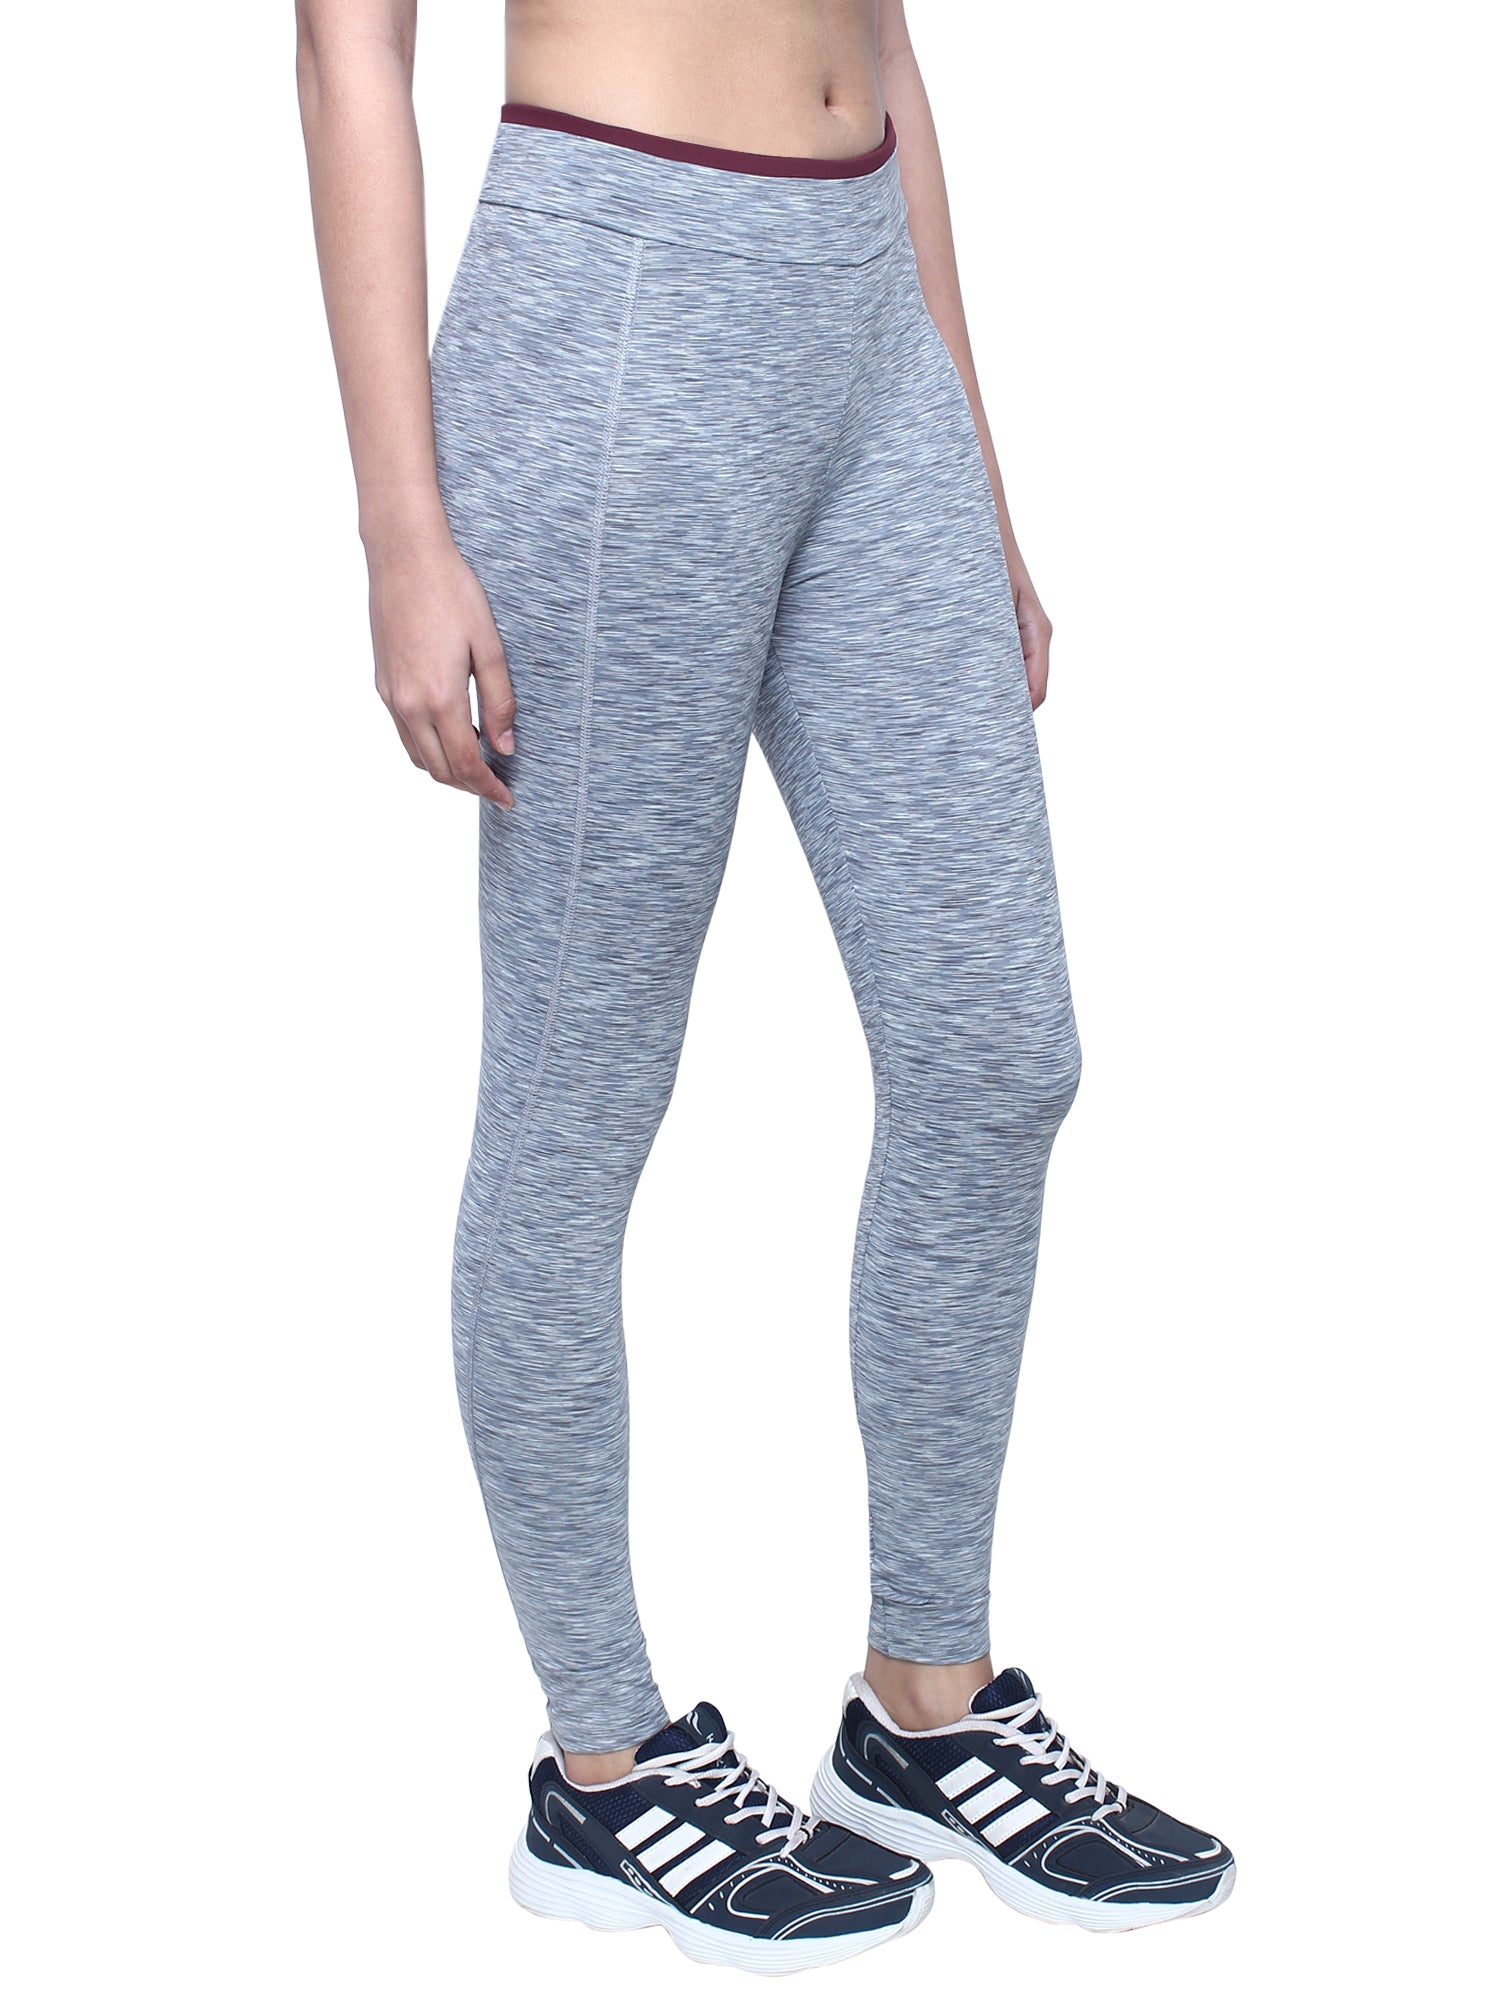 Buy Neu Look Gym wear Leggings Ankle Length Stretchable Workout Tights / Sports  Leggings / Sports Fitness Yoga Track Pants for Girls Women_GT39 Online In  India At Discounted Prices